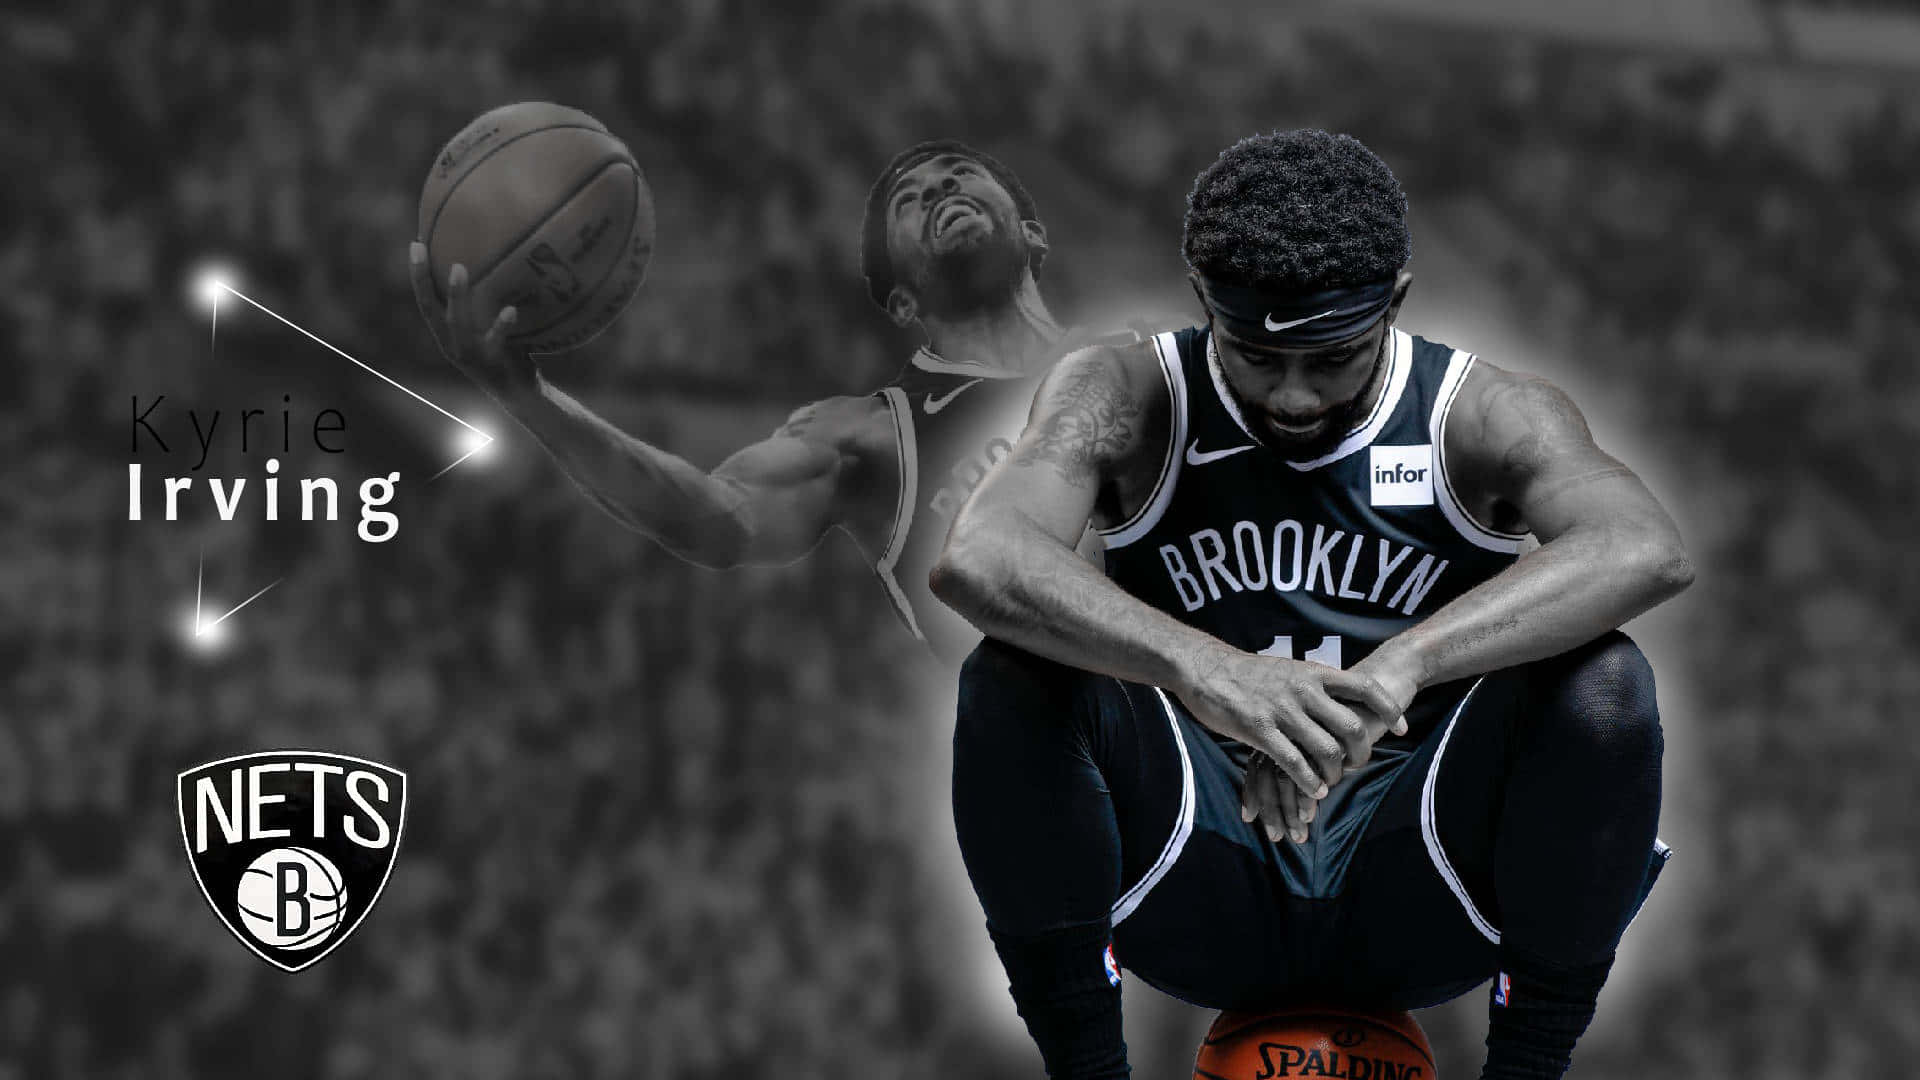 Kyrie Irving excels on the basketball court representing the Brooklyn Nets Wallpaper